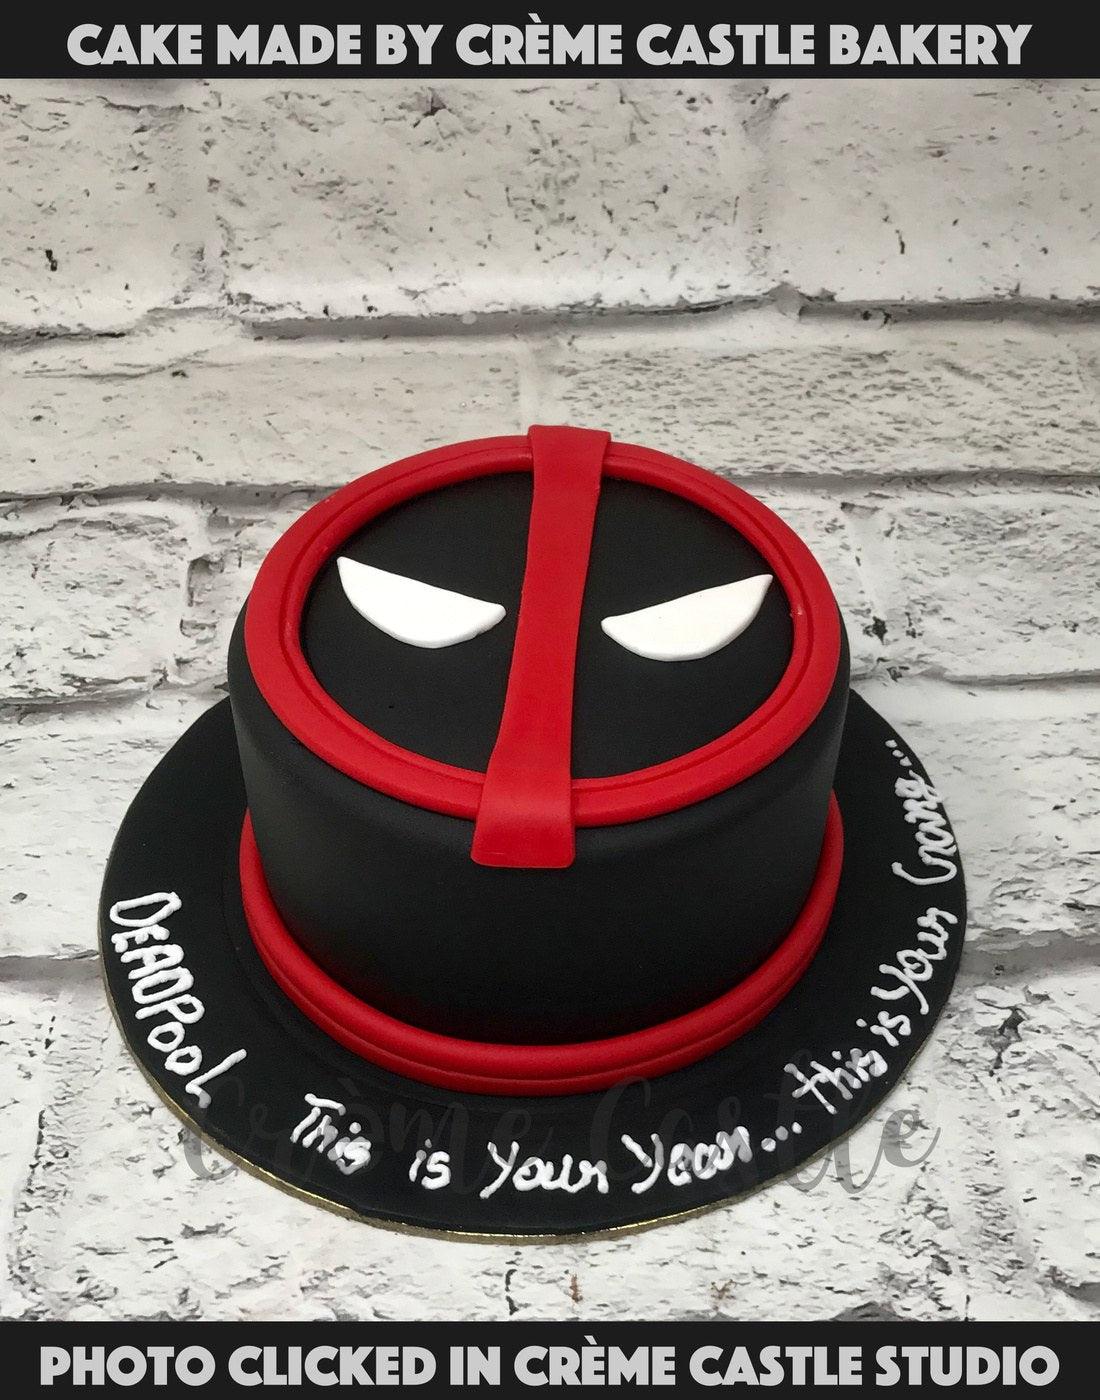 Deadpool | Sweet Tops - Personalised, Edible Cake Toppers and Gifts